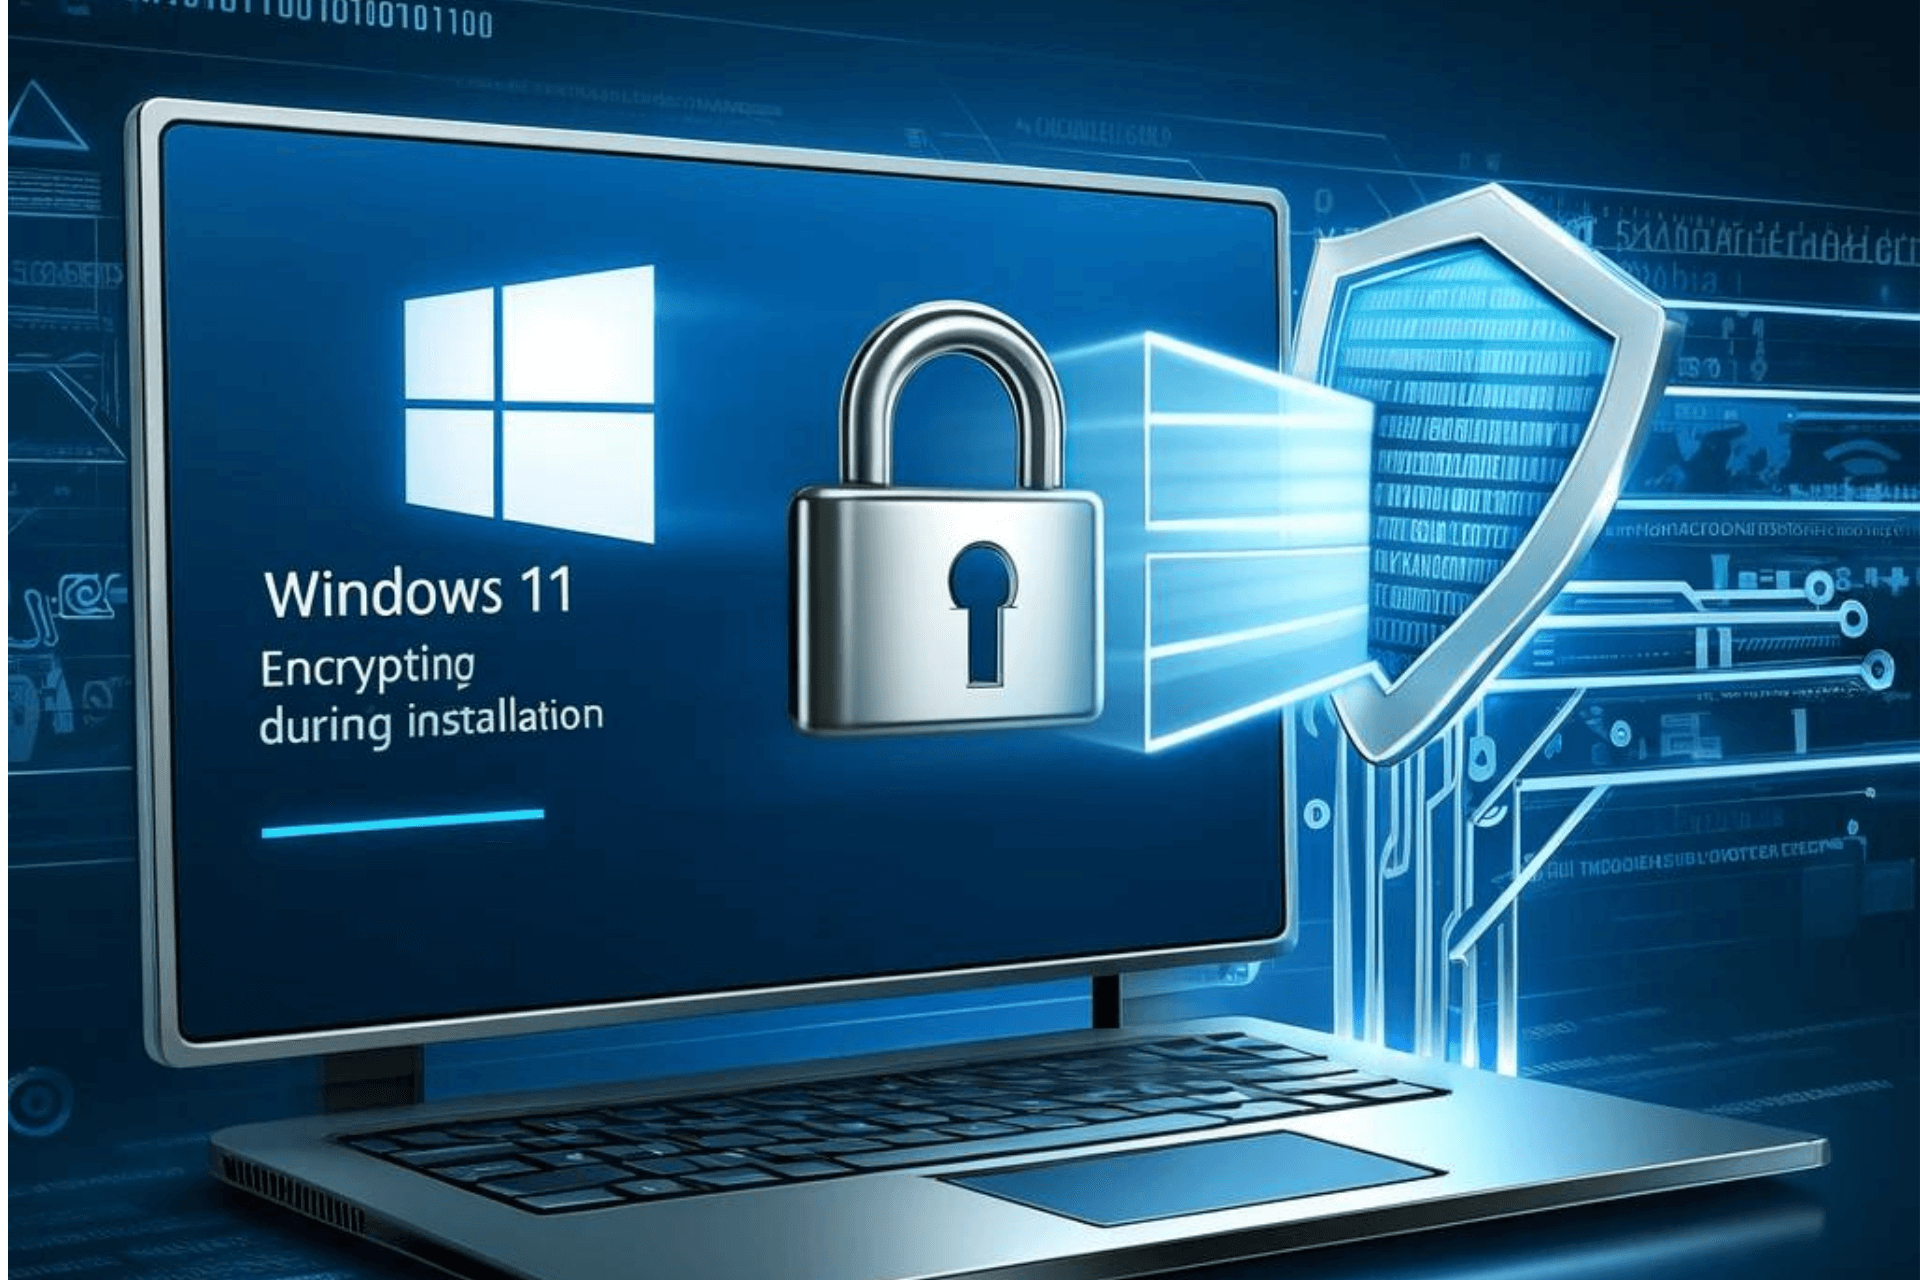 Did you know that Windows 11 is encrypting your disks during installation?